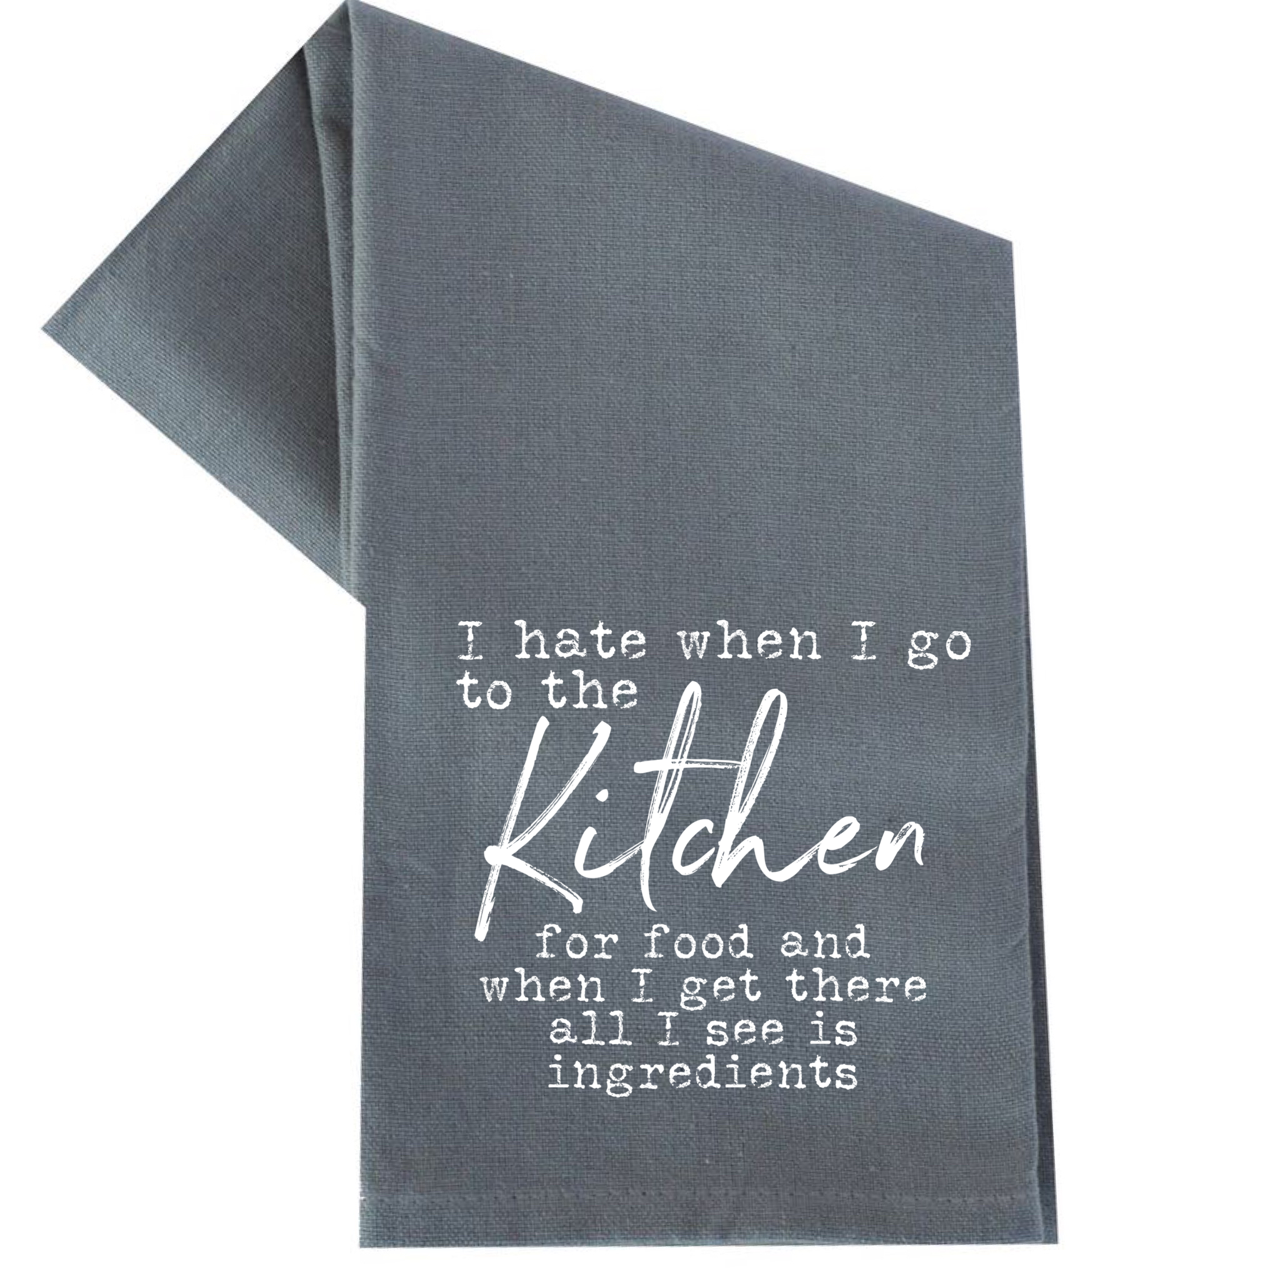 I HATE IT WHEN I GO TO THE KITCHEN TEA TOWEL